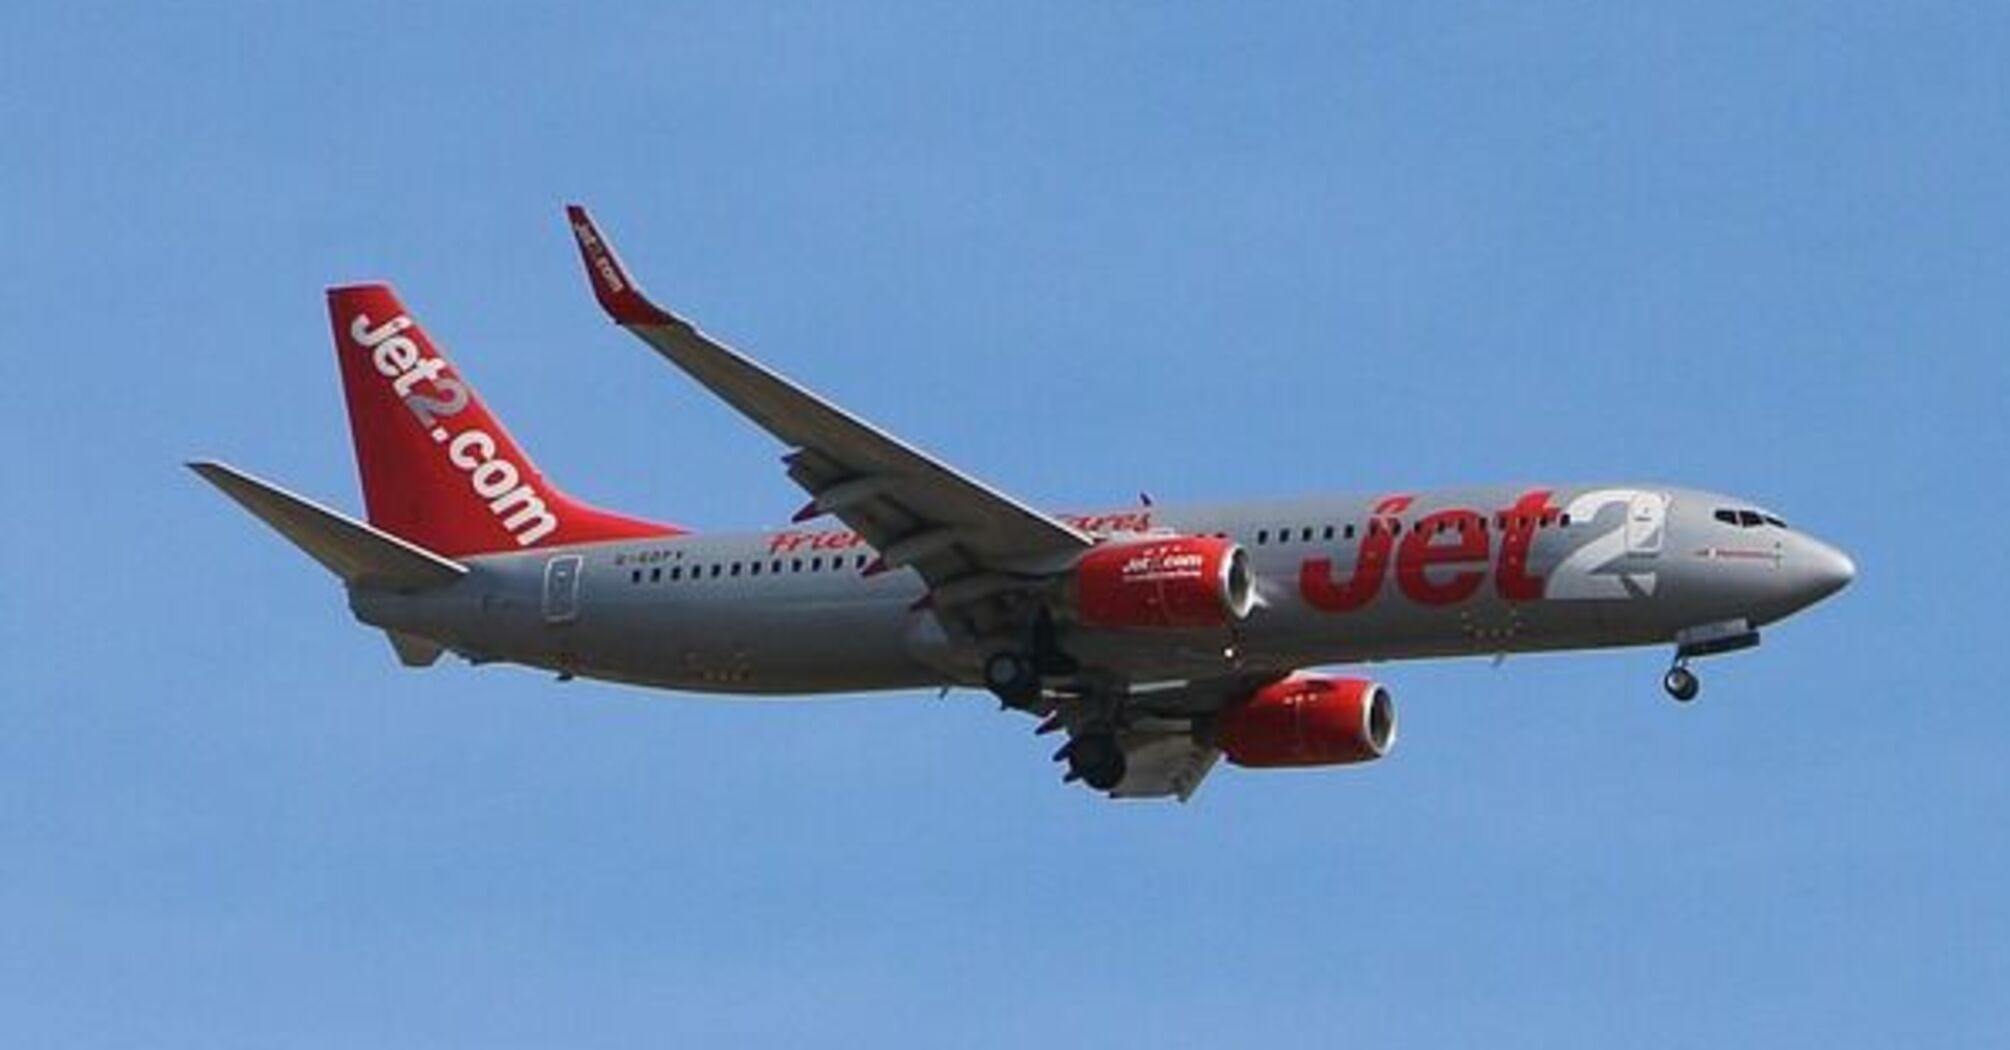 Jet2 criticizes 'disgraceful' passenger after diverting flight to Tenerife and calling police